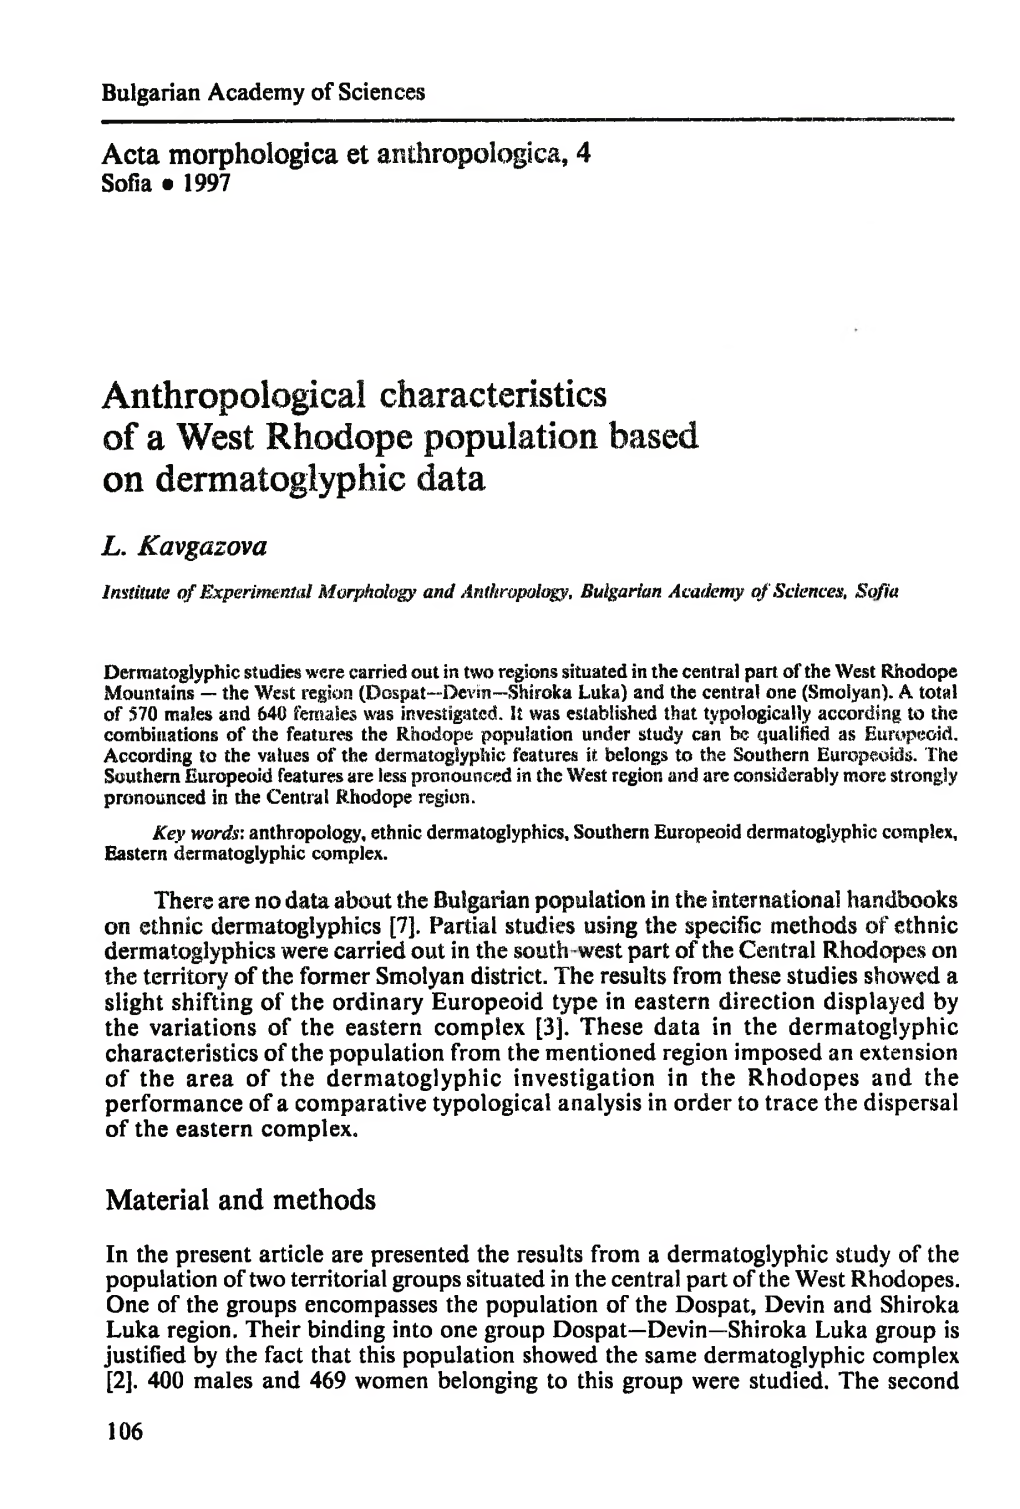 Anthropological Characteristics of a West Rhodope Population Based on Dermatoglyphic Data